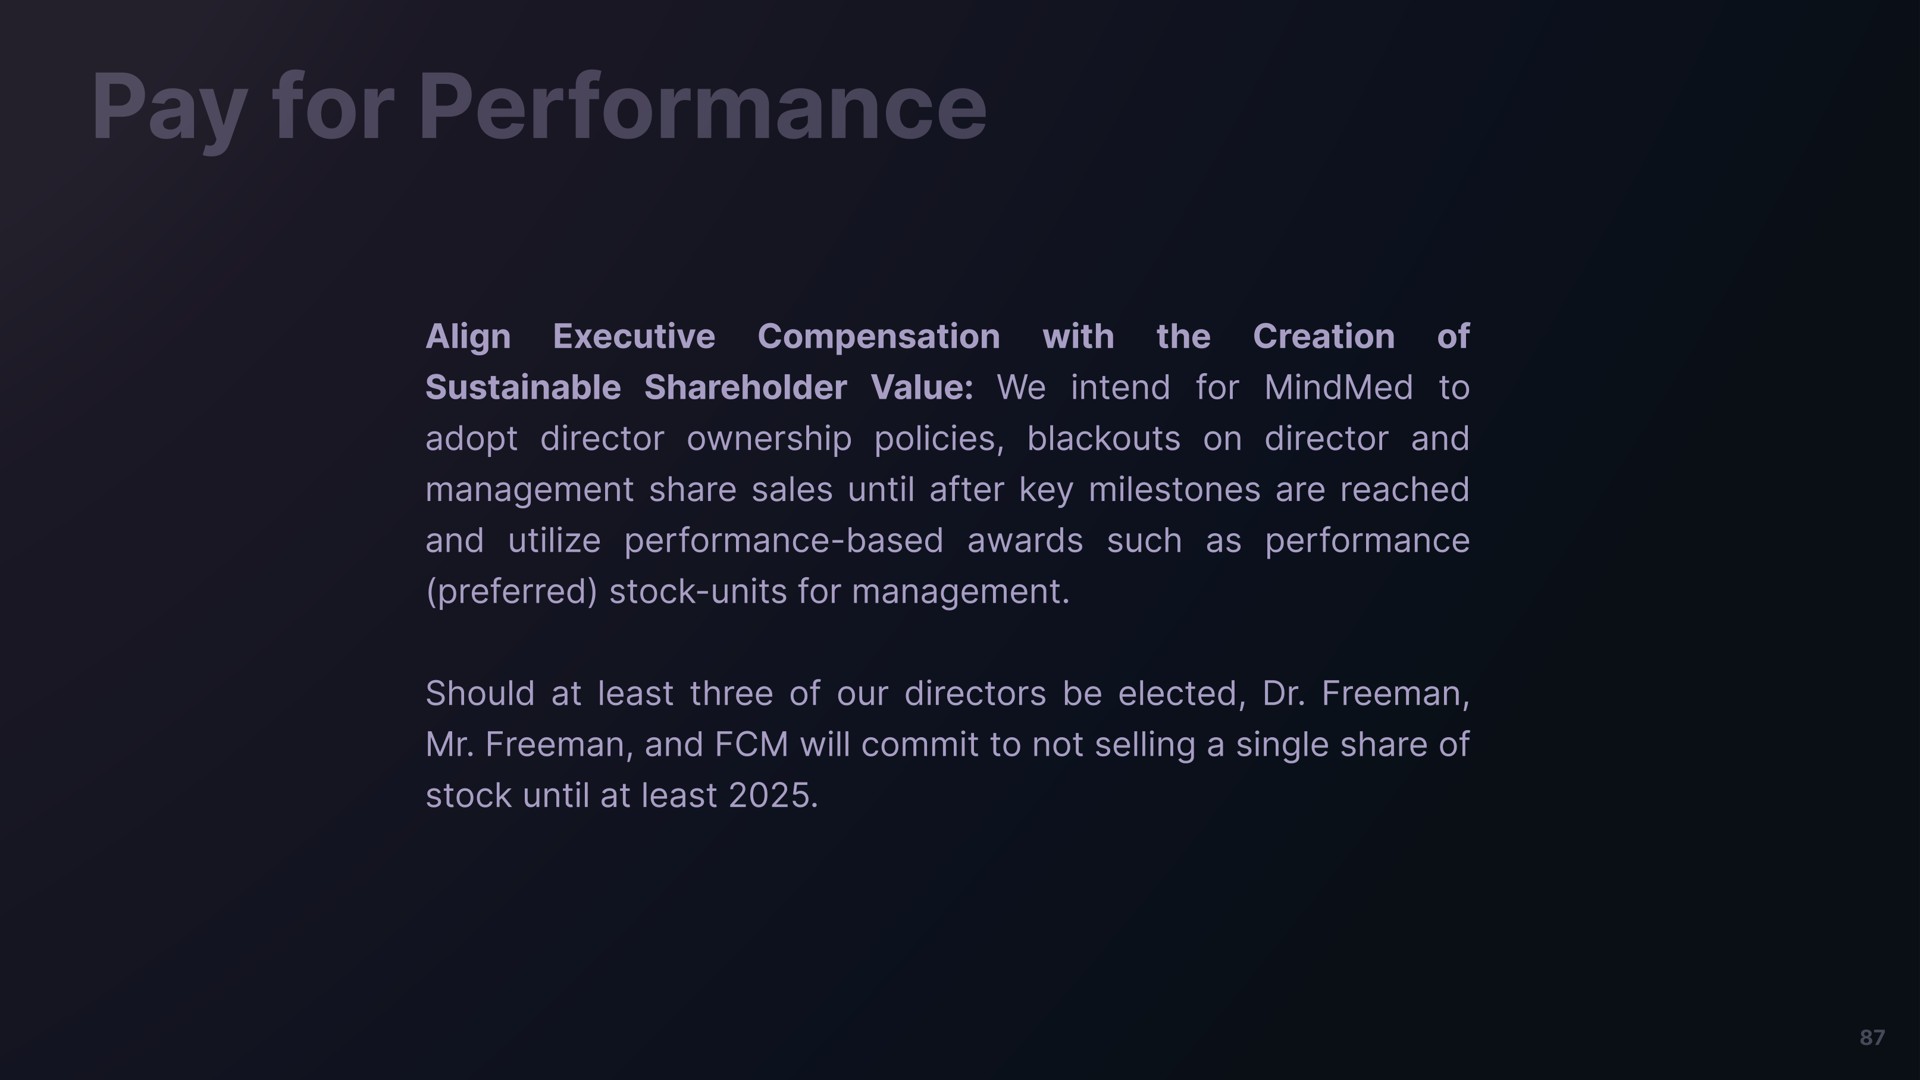 pay for performance | Freeman Capital Management